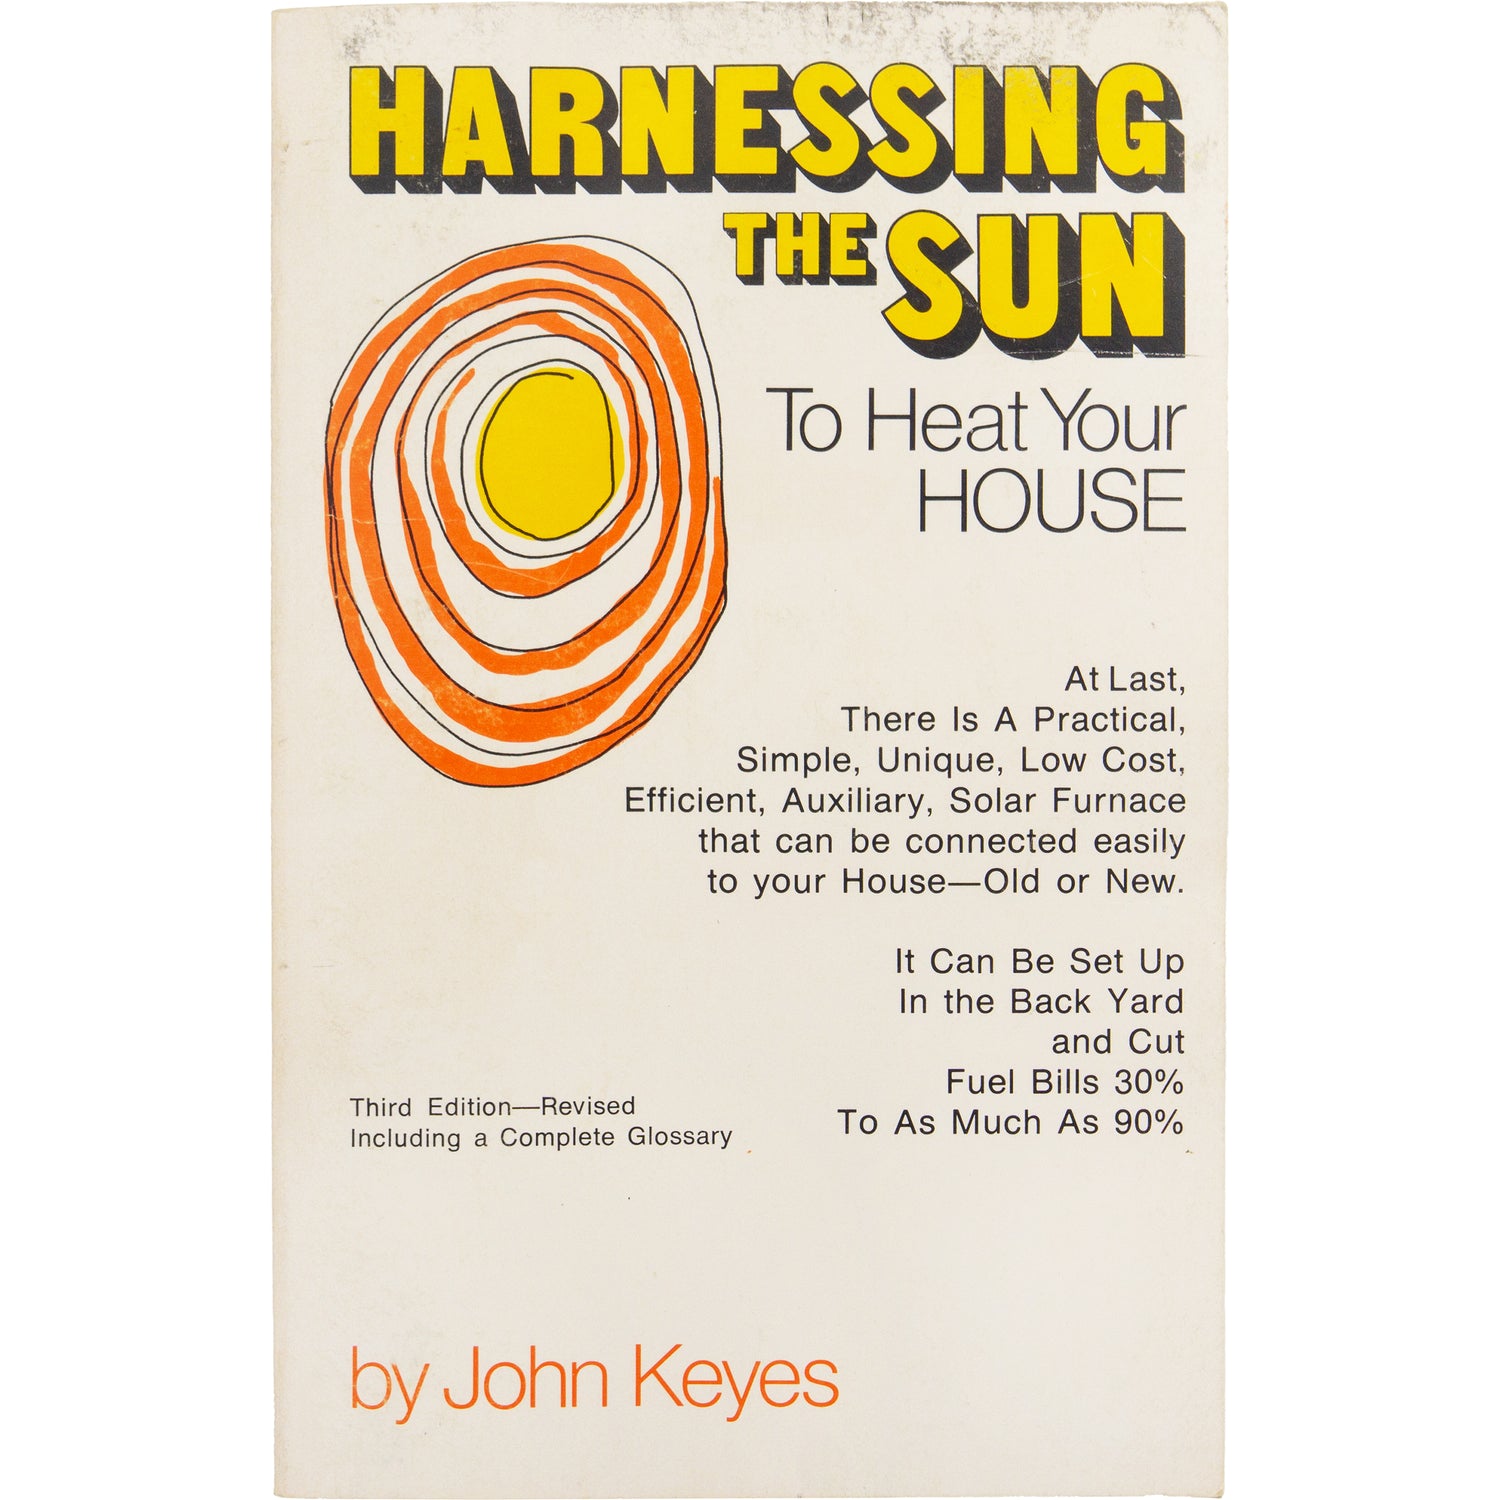 HARNESSING THE SUN TO HEAT YOUR HOUSE BOOK